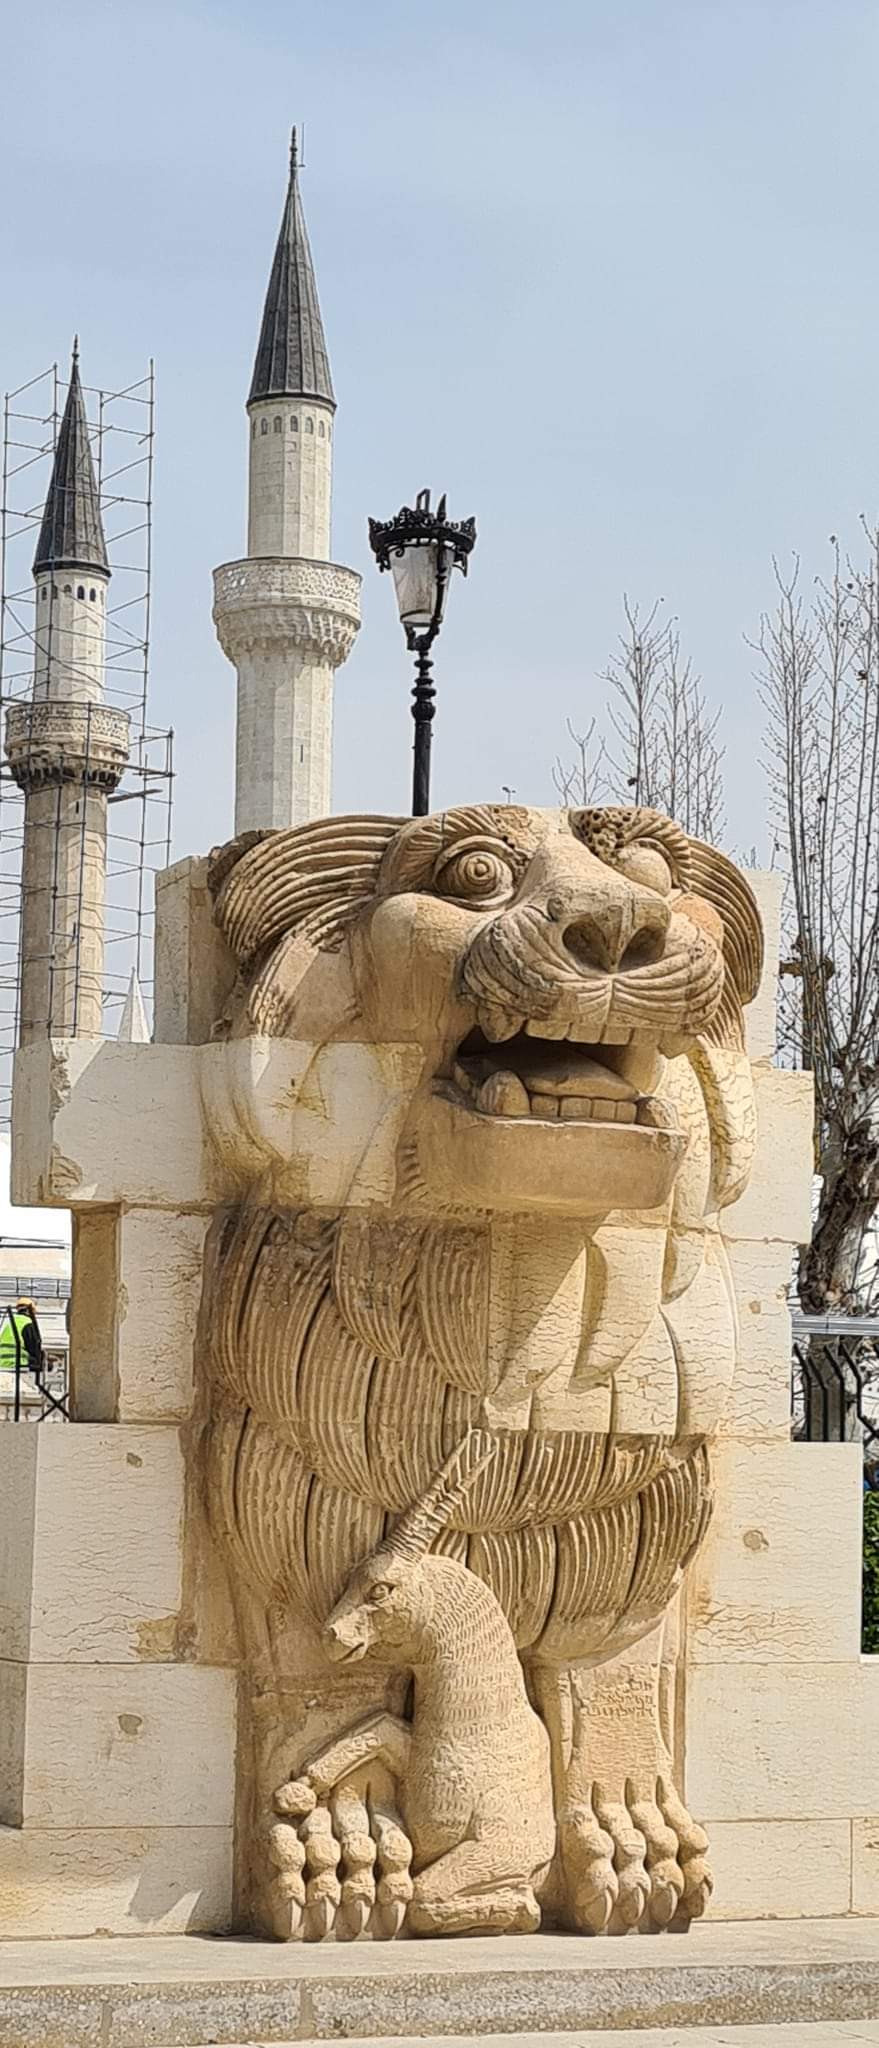 The reconstructed Lion of Am from Palmyra, Syria